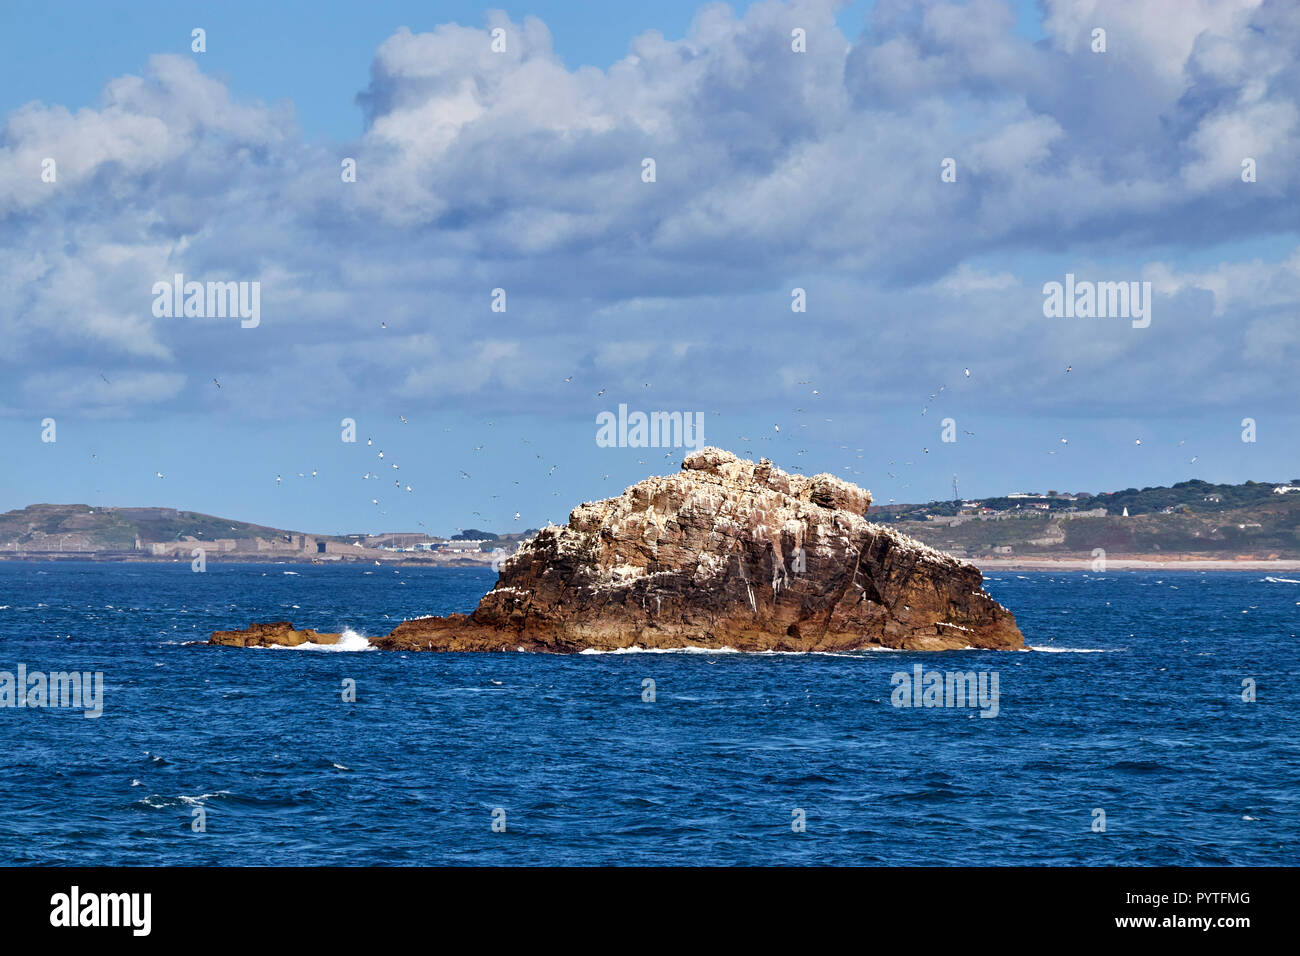 This is an image of a rock used by Gannets for roosting. Taken of the West coast of Alderney Stock Photo